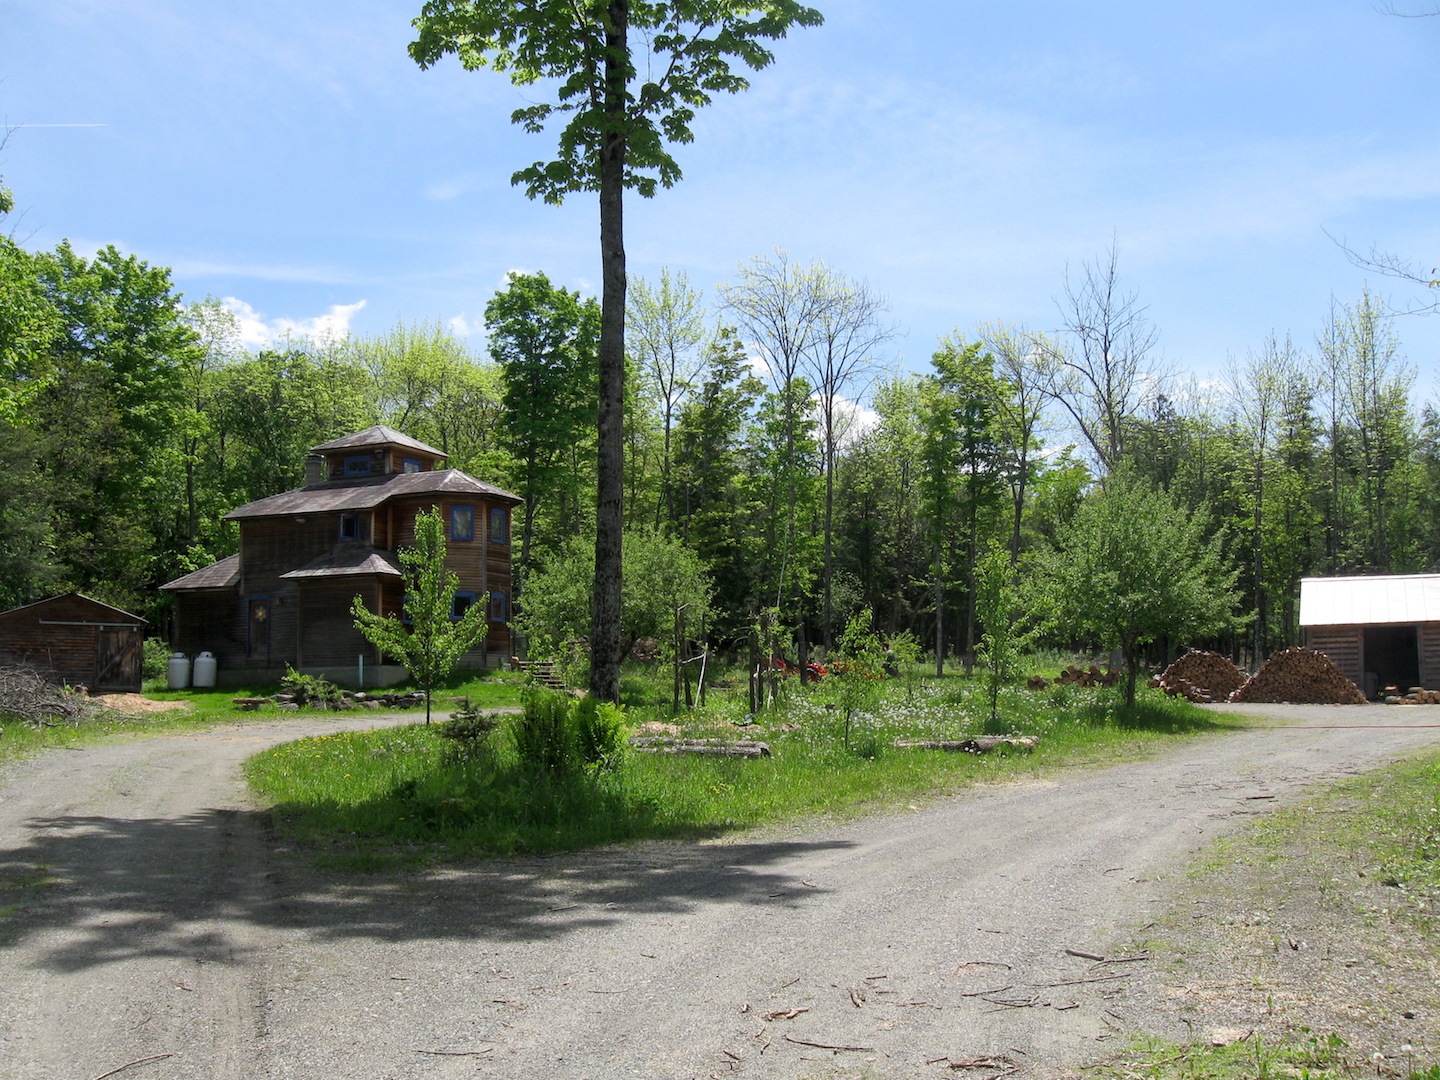 Homesteading on Wooded Land